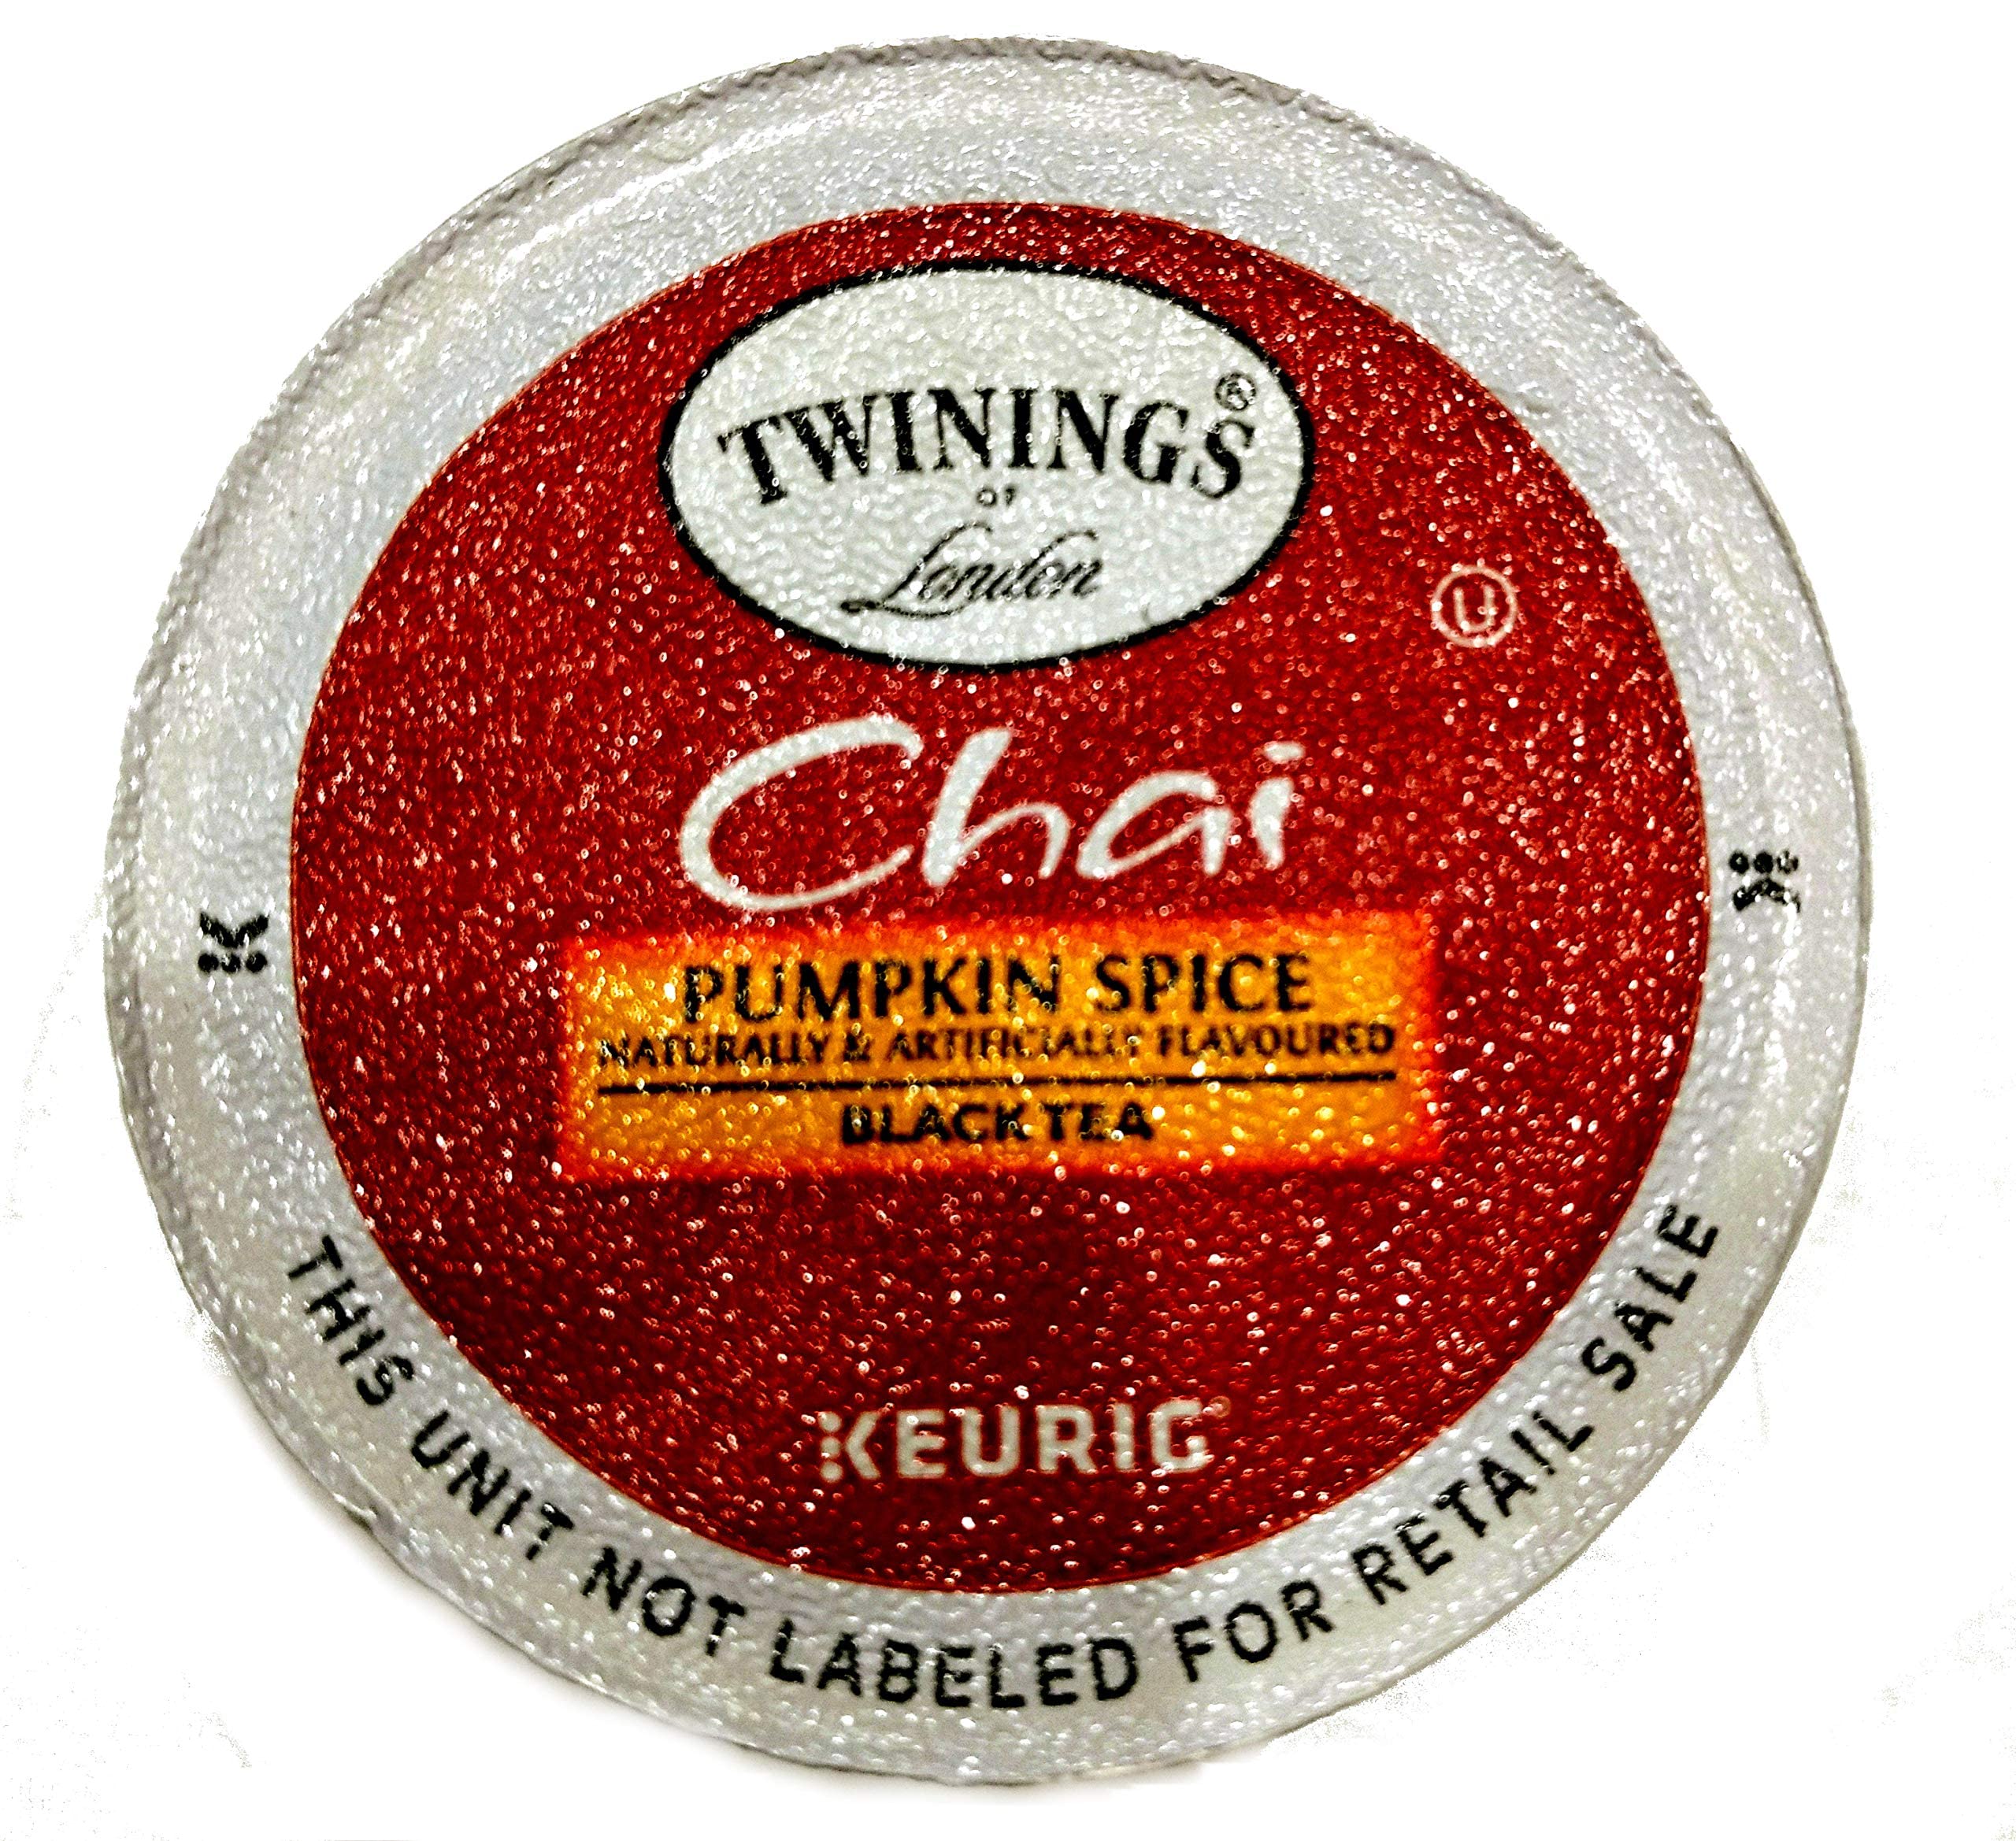 Twinings of London, Chai Pumpkin Spice Black Tea 24 K-Cup Pods (Pack of 1), For use in all Keurig K-Cup Brewers